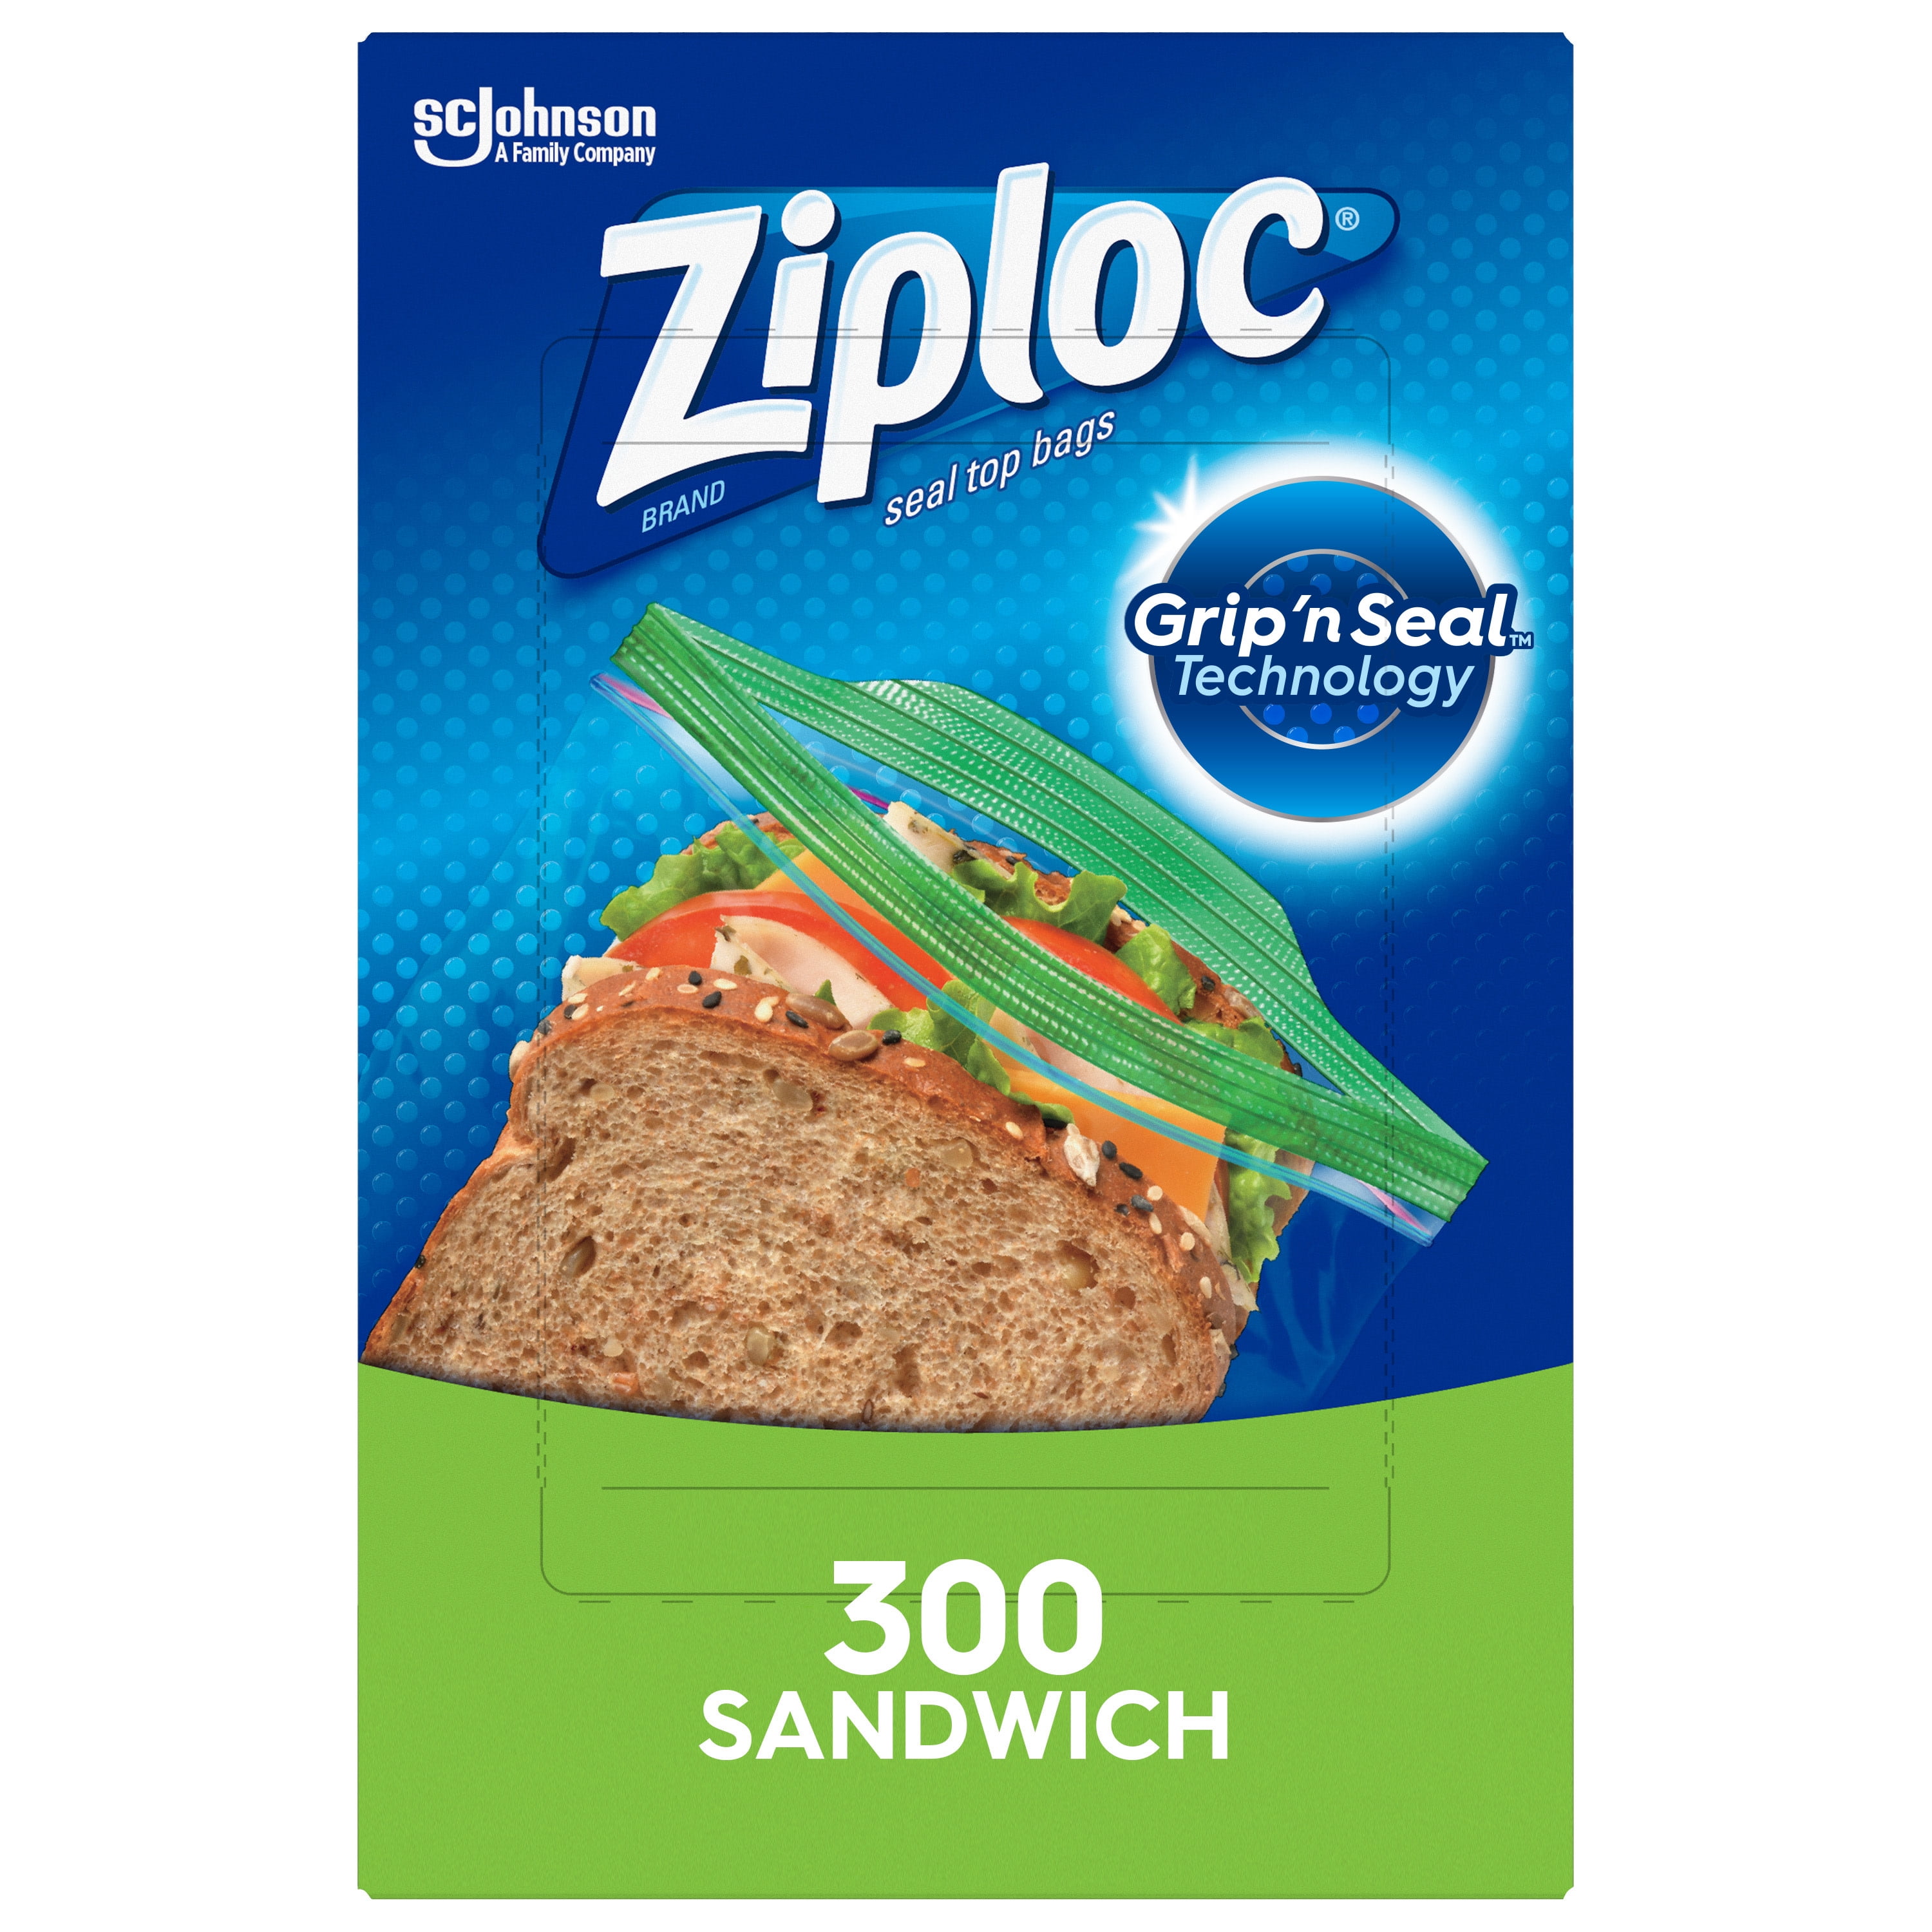 Save on Our Brand Double Zipper Sandwich Bags Order Online Delivery